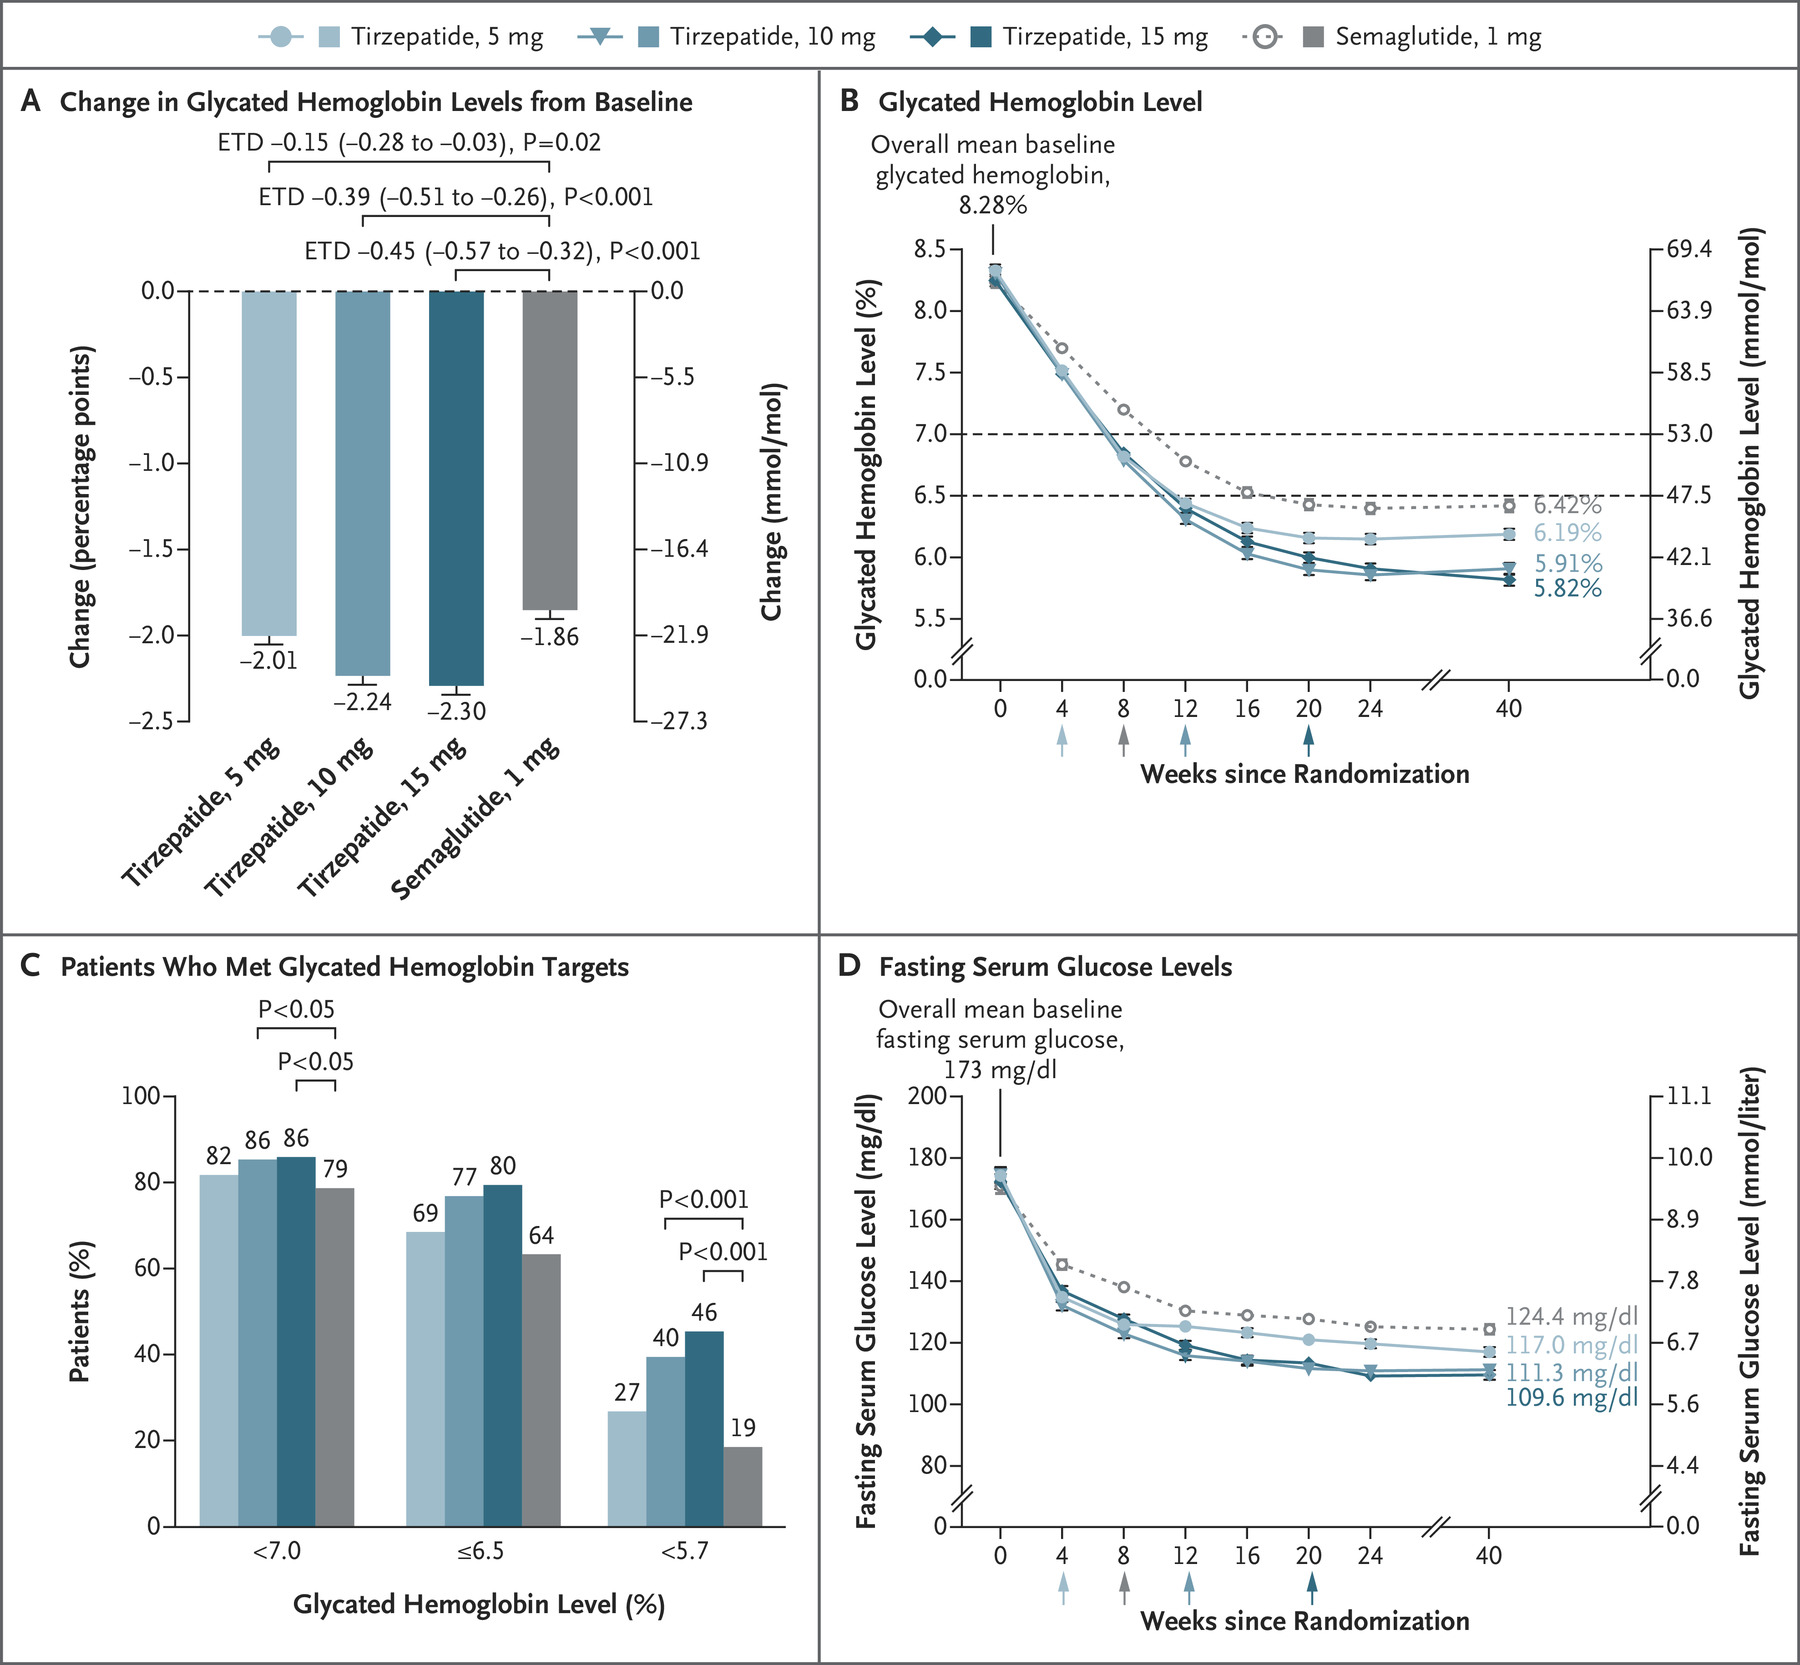 Effect of once-weekly tirzepatide, as compared with semaglutide, on the HbA1c level.